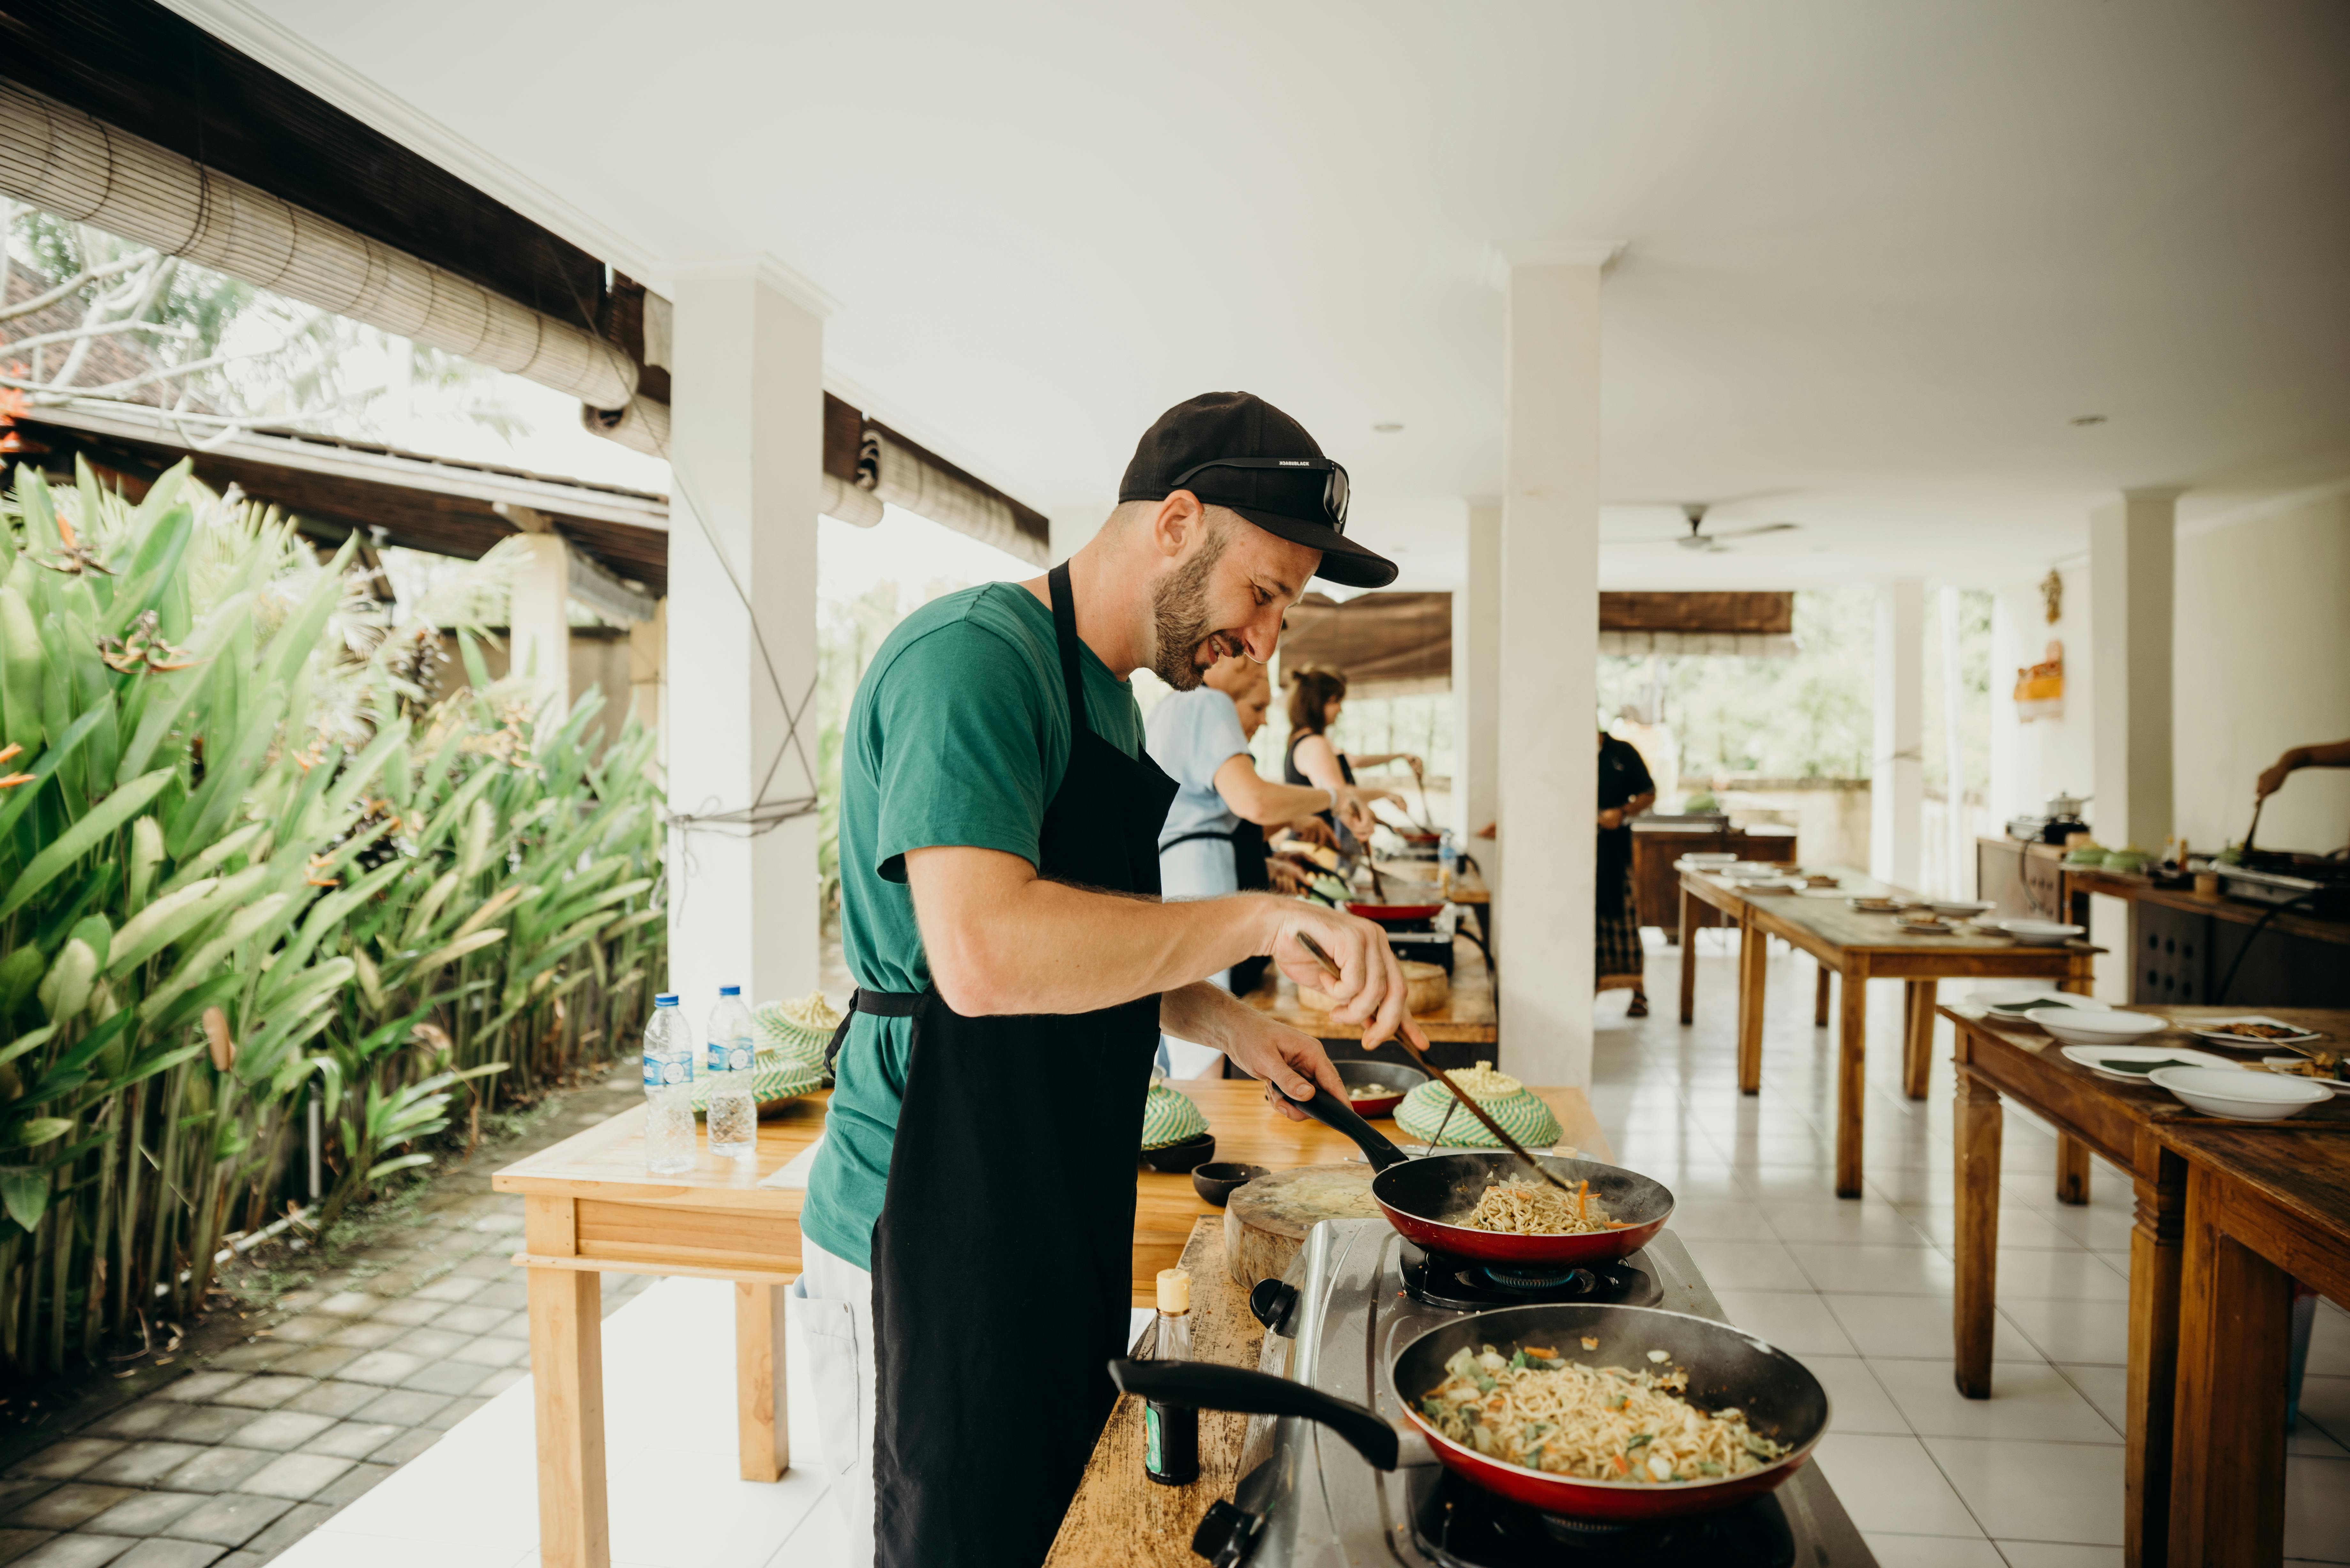 A man in black apron cooking food in a cooking competition | Source: Pexels